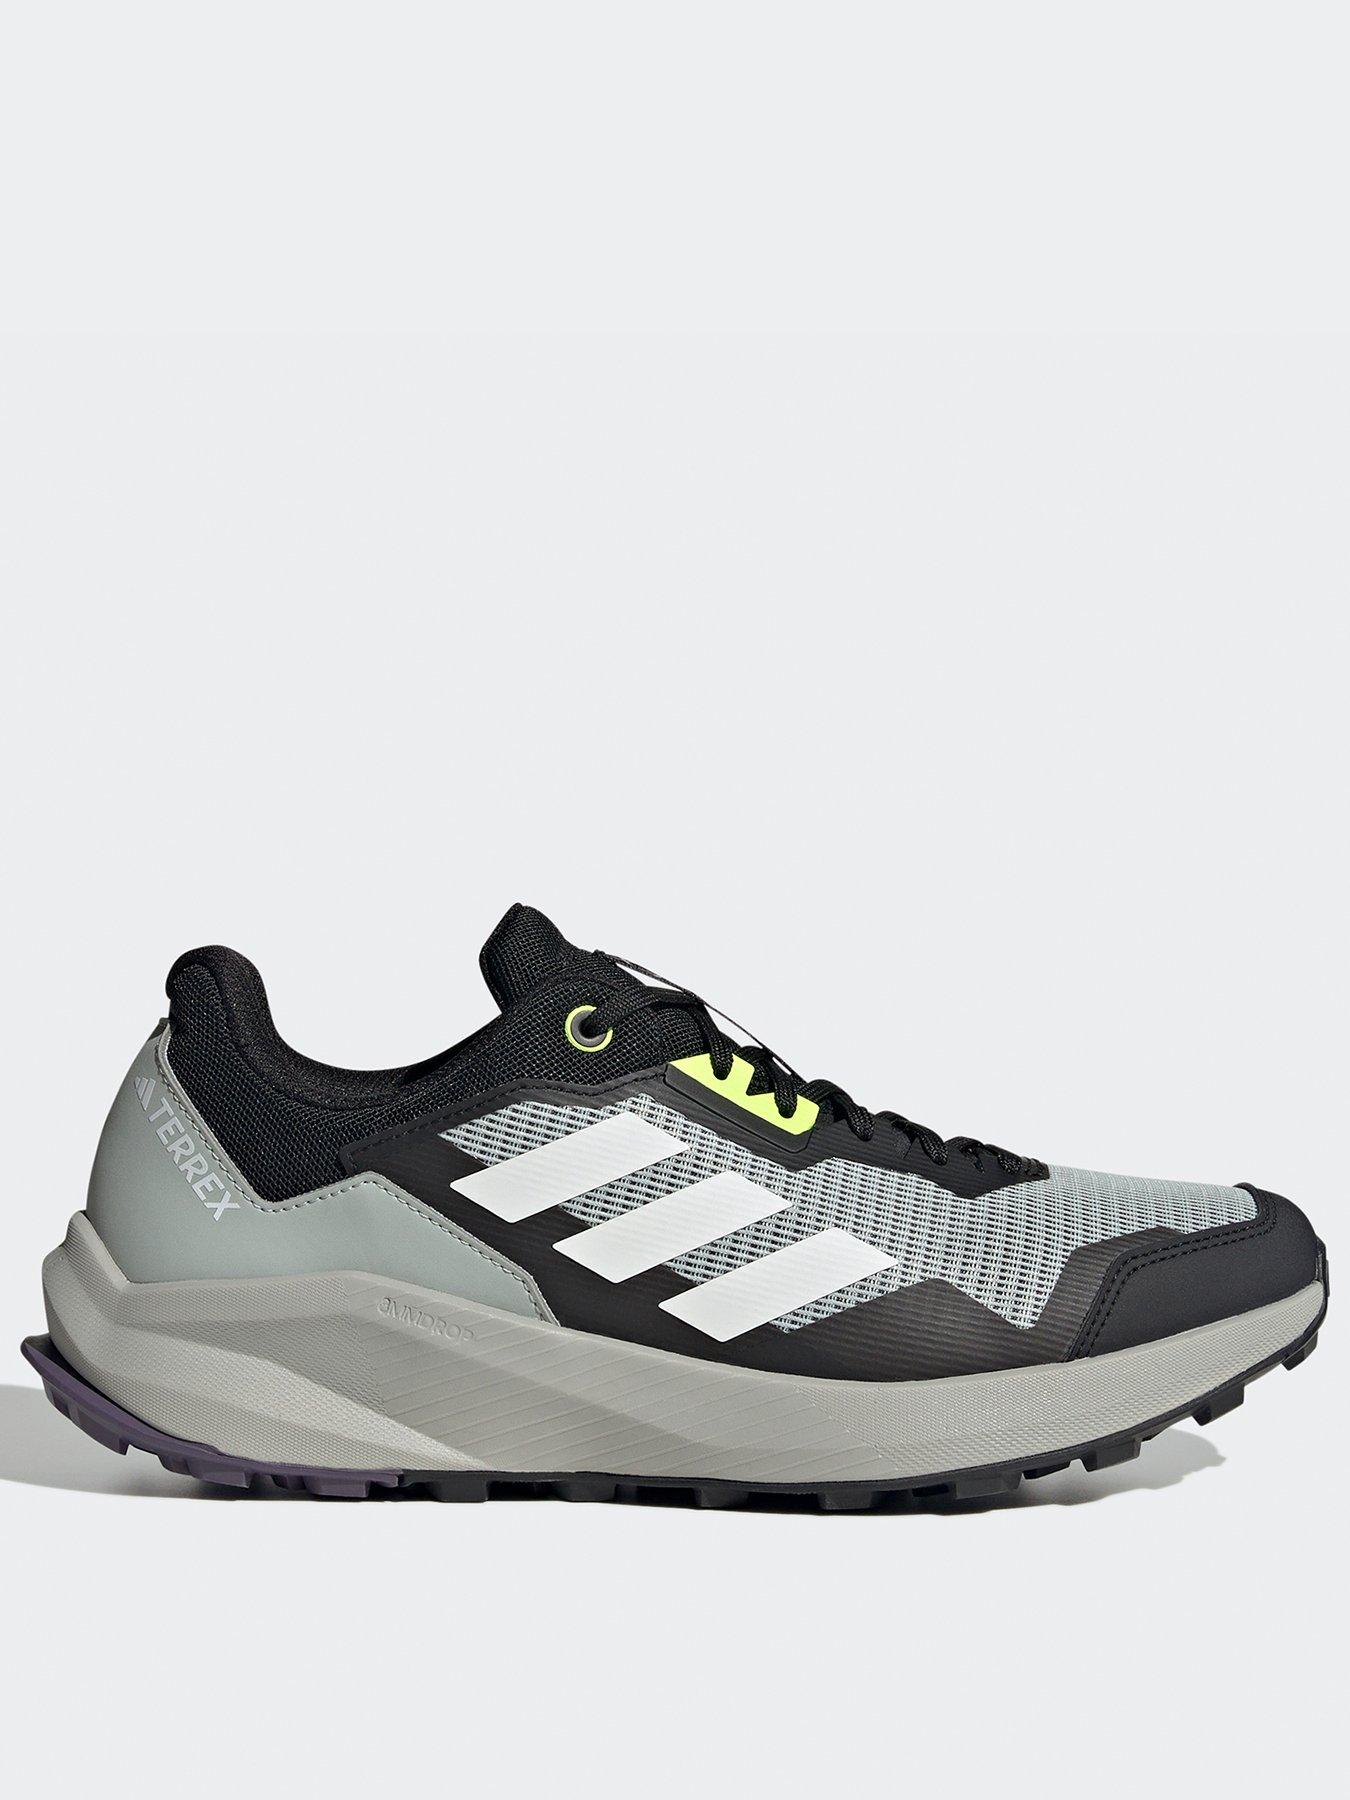 adidas Terrex Men's Trailrider Trail Running Shoes - Silver | very.co.uk